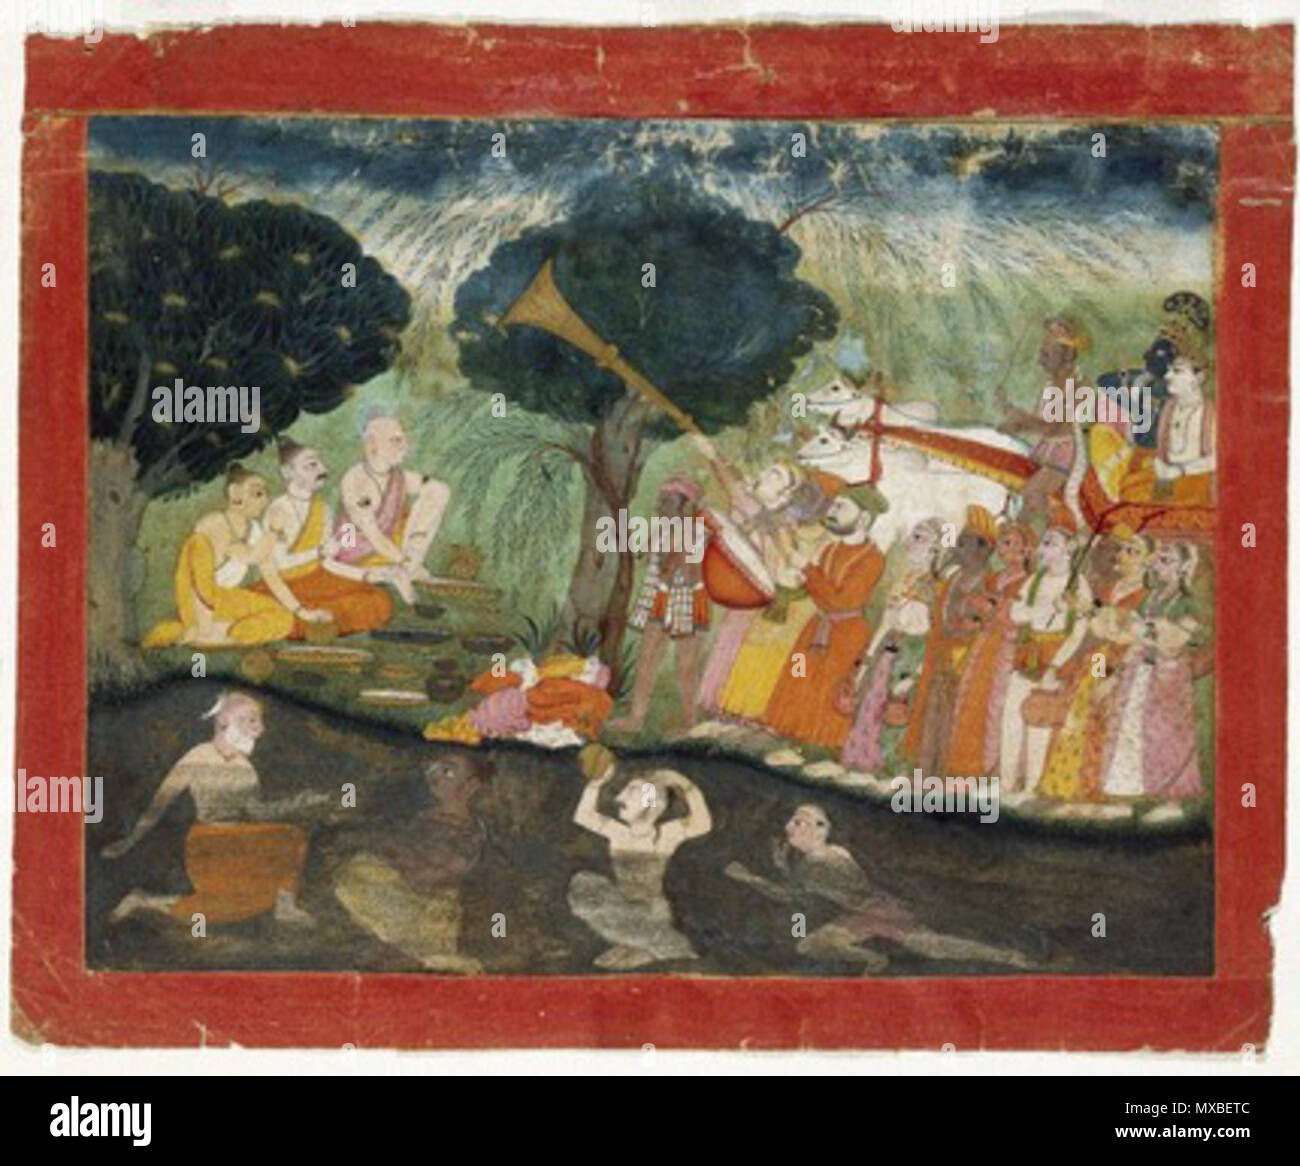 . Krishna and Balarama on Their way to Mathura Page from an illustrated manuscript of the Bhagavata Purana . This is an illustration from the Bhagavata Purana, a lengthy Hindu scripture dedicated to the god Krishna, who is said to have lived on earth as a prince. It depicts an episode from Krishna’s youth, much of which was spent in hiding in the cowherding community of Vrindavan. Eventually he had to leave this idyllic rural setting and return to his family’s kingdom at Mathura, where his evil uncle was ruling unjustly. Krishna (with blue skin) is shown here at the far right with his brother, Stock Photo